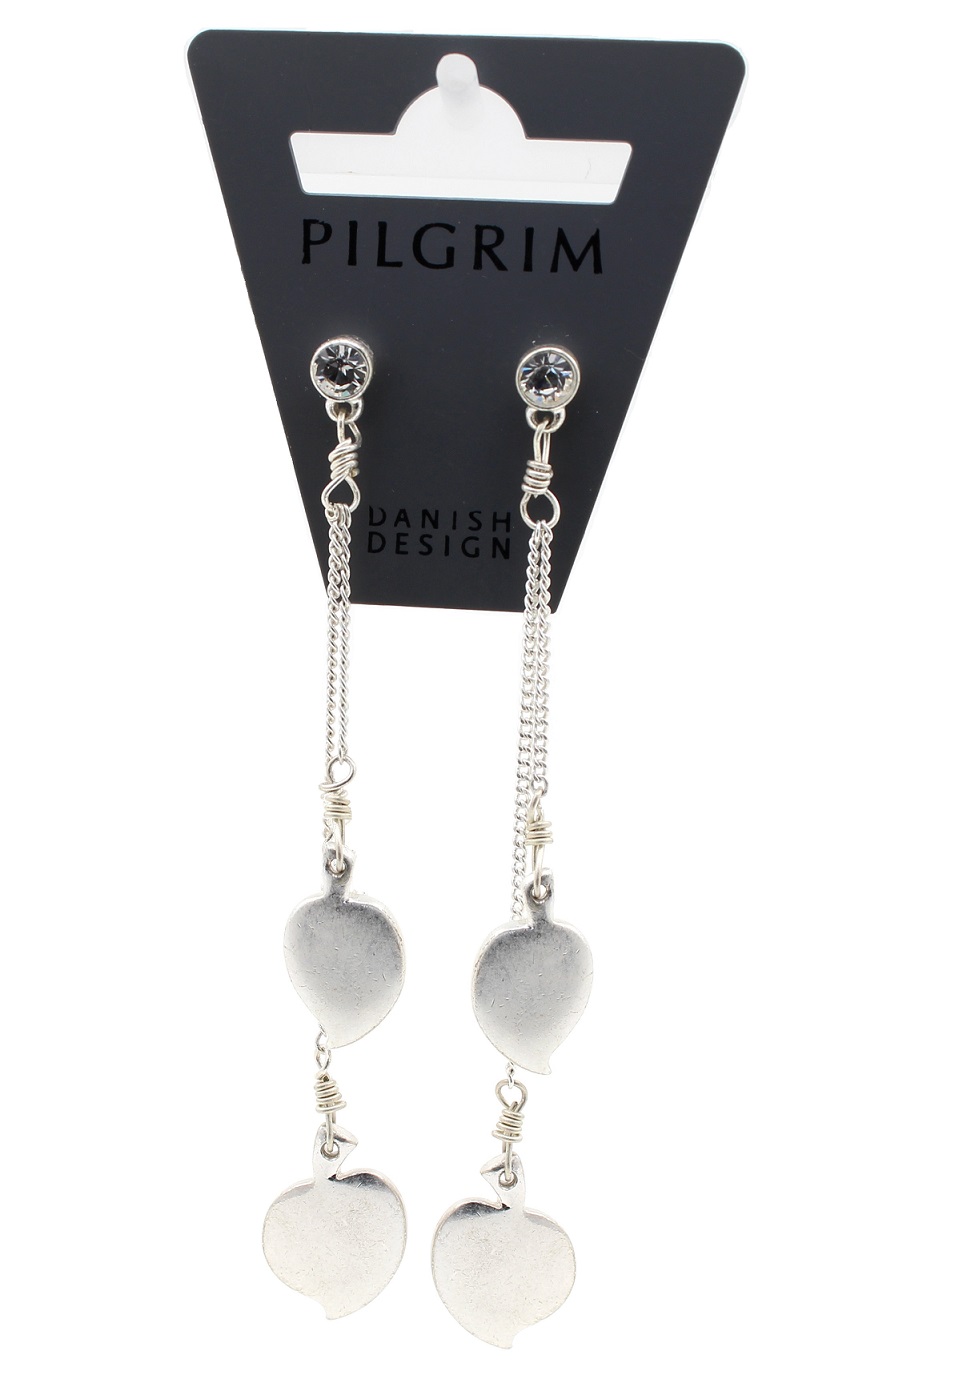 PILGRIM - Patina - Earrings Style 3 - Silver Plate/Clear BNWT